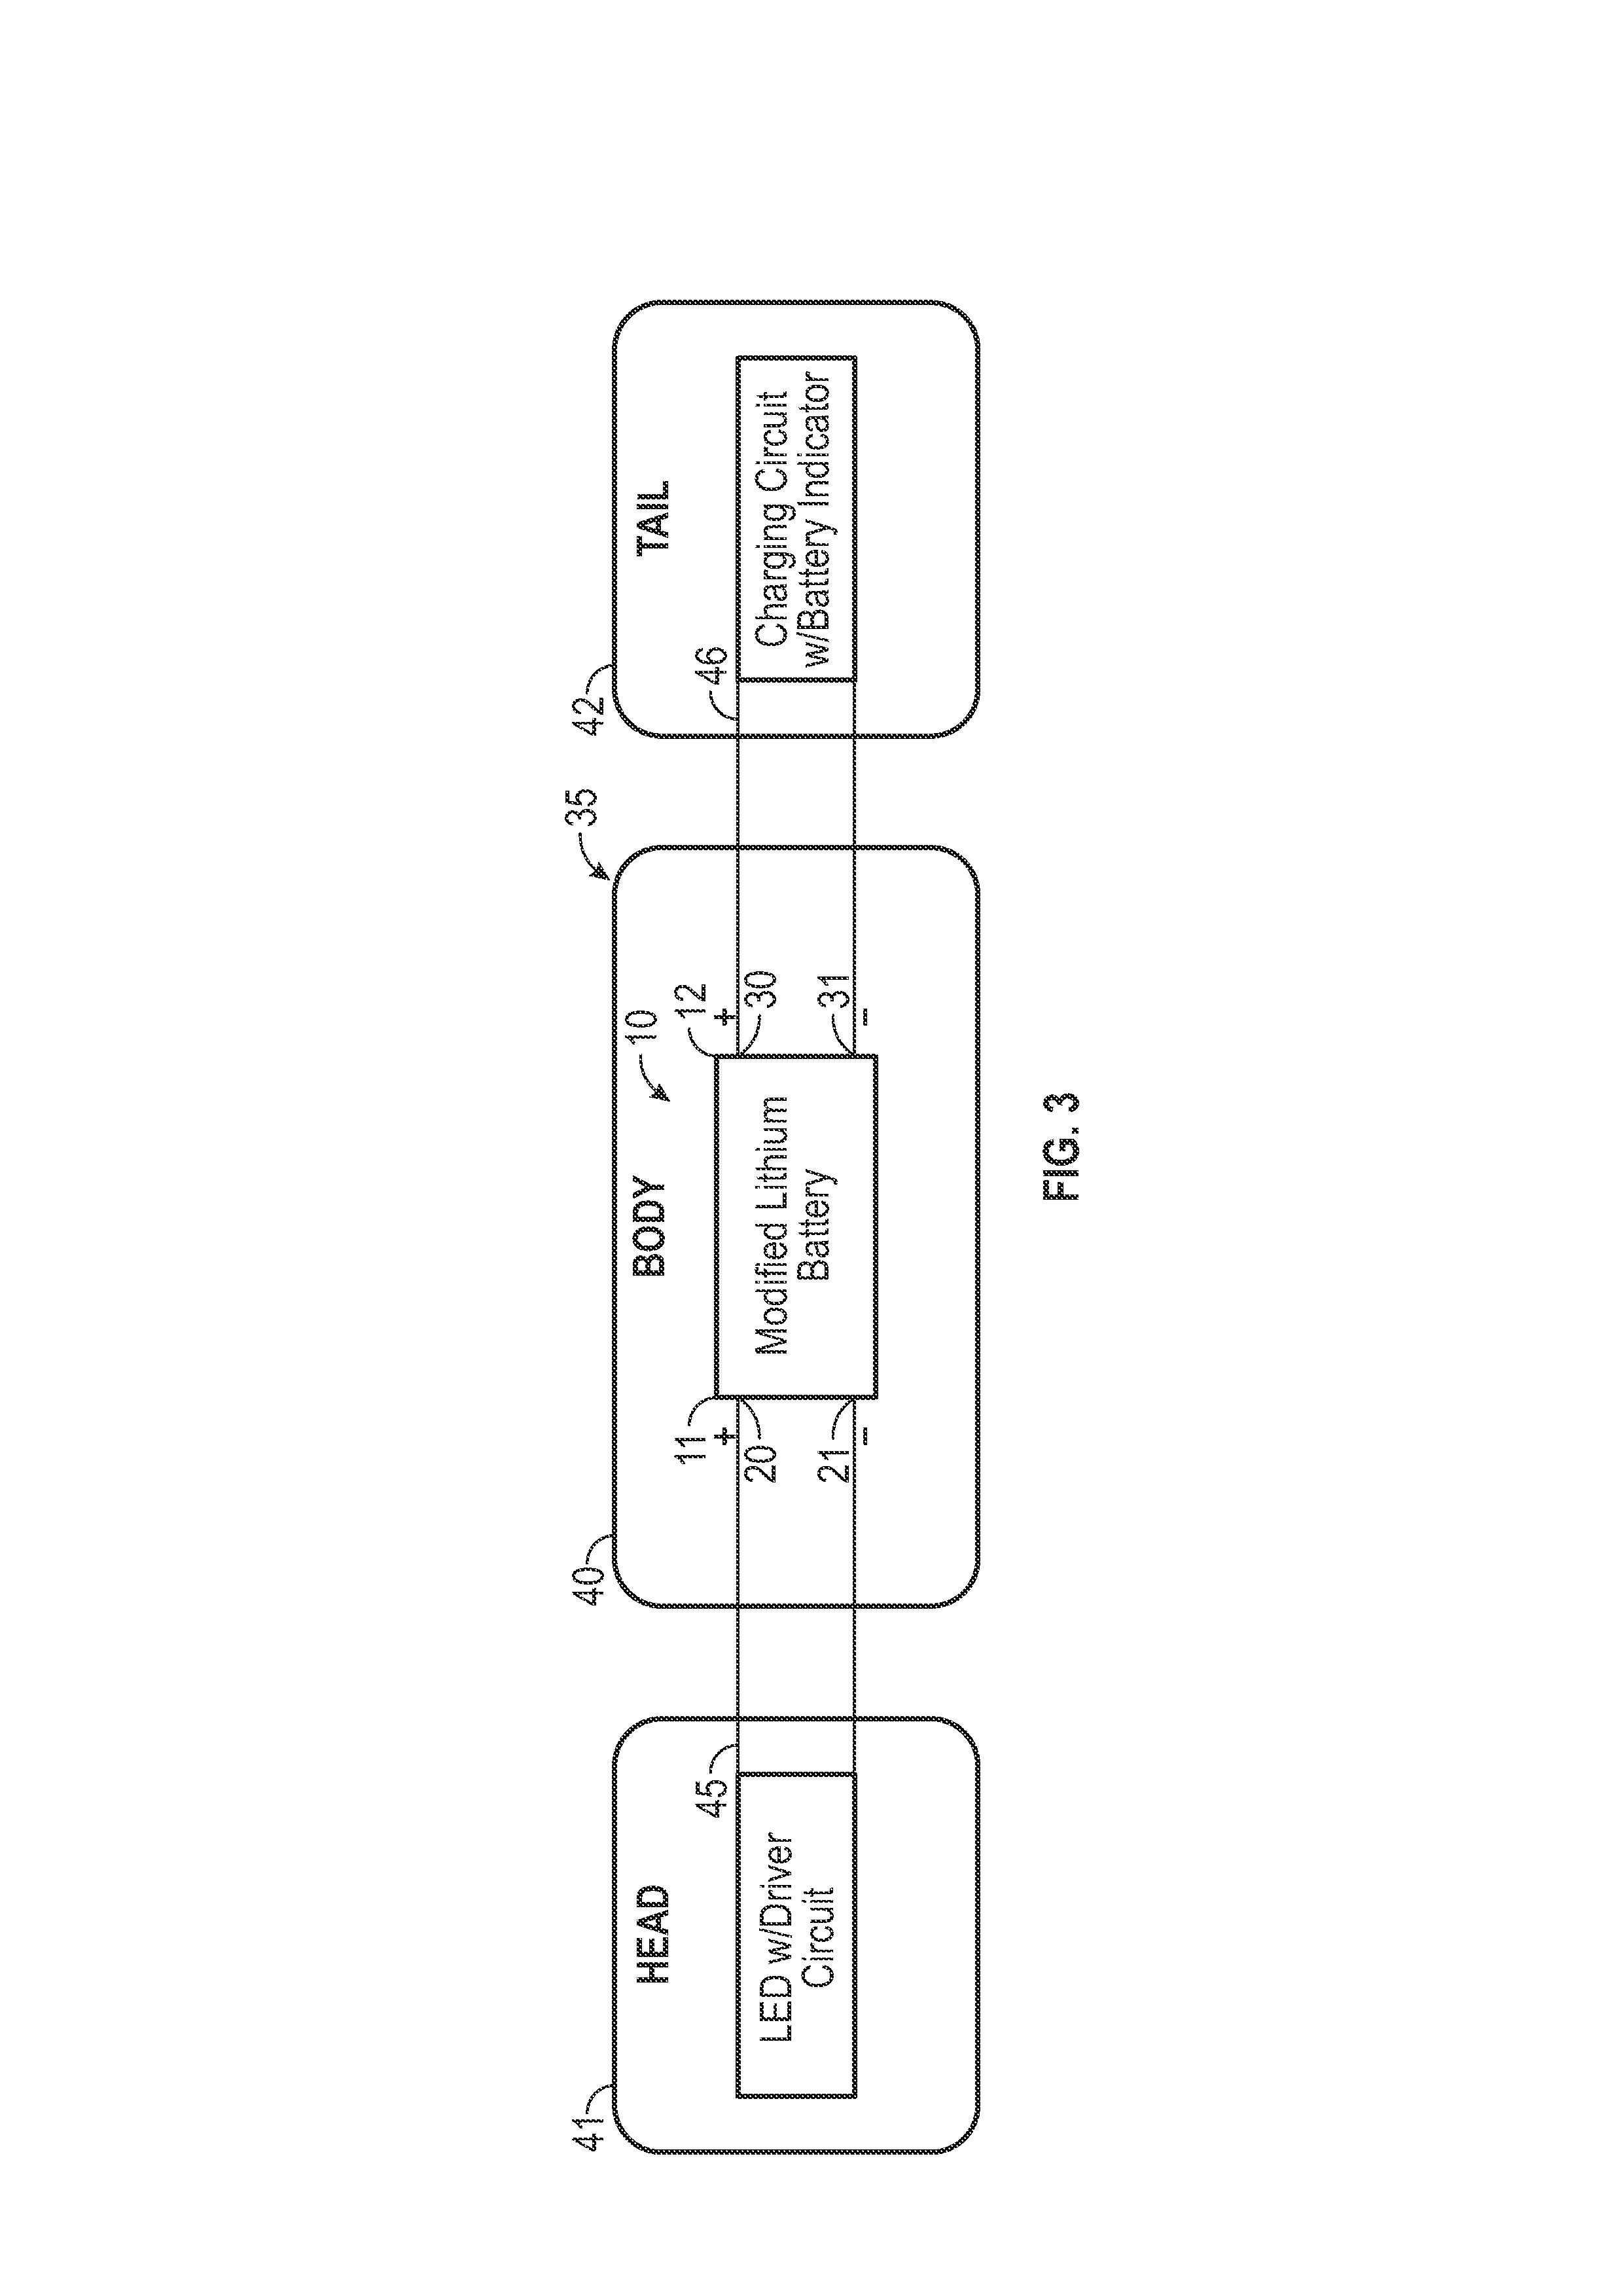 Battery and method of use